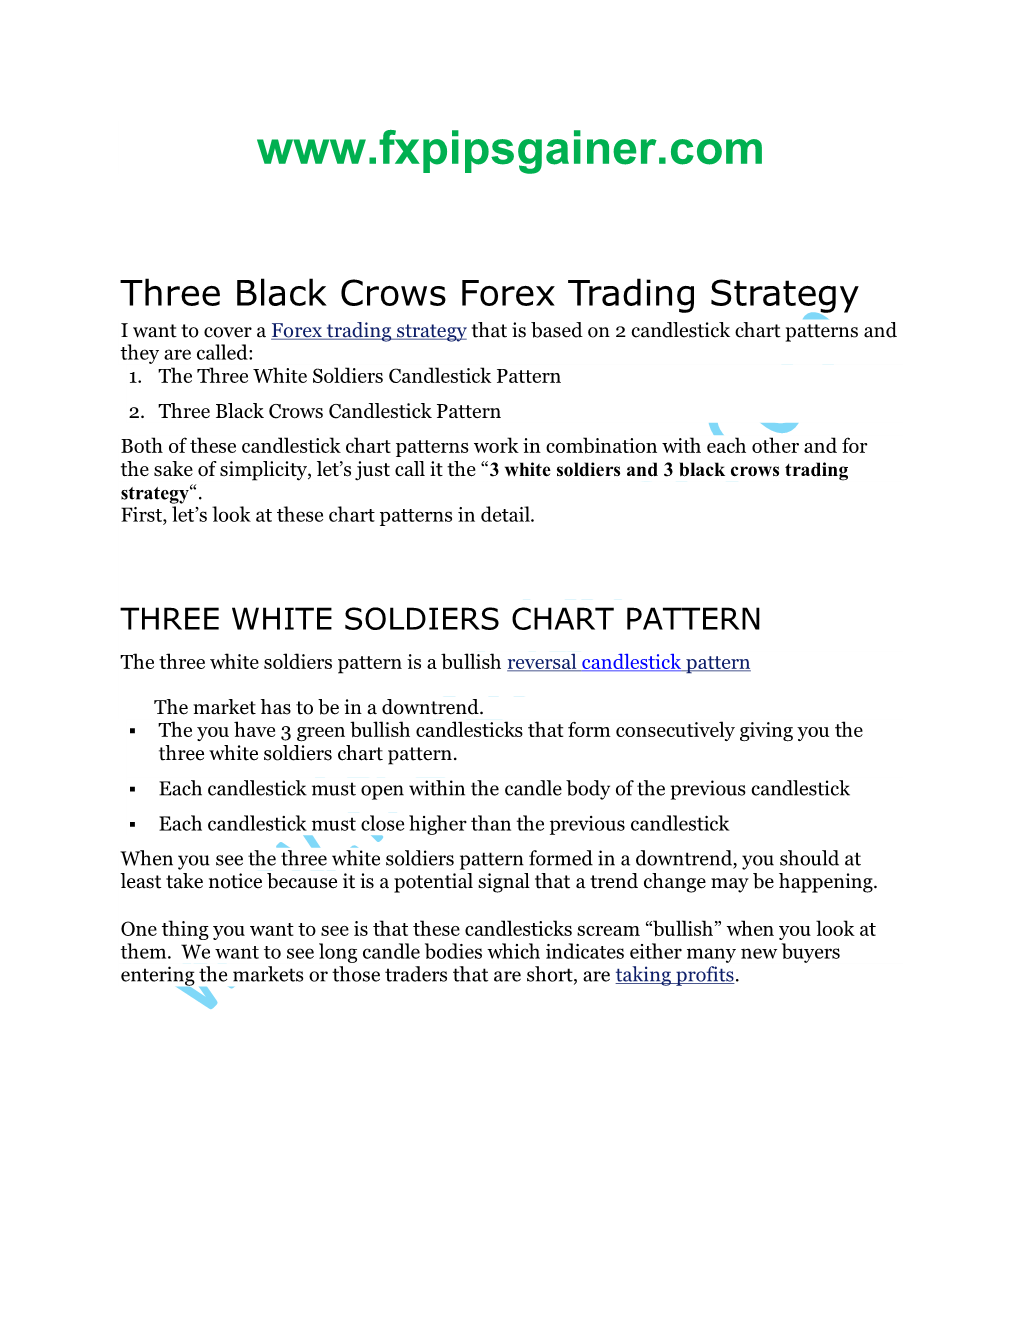 For More of This Strategy Download This